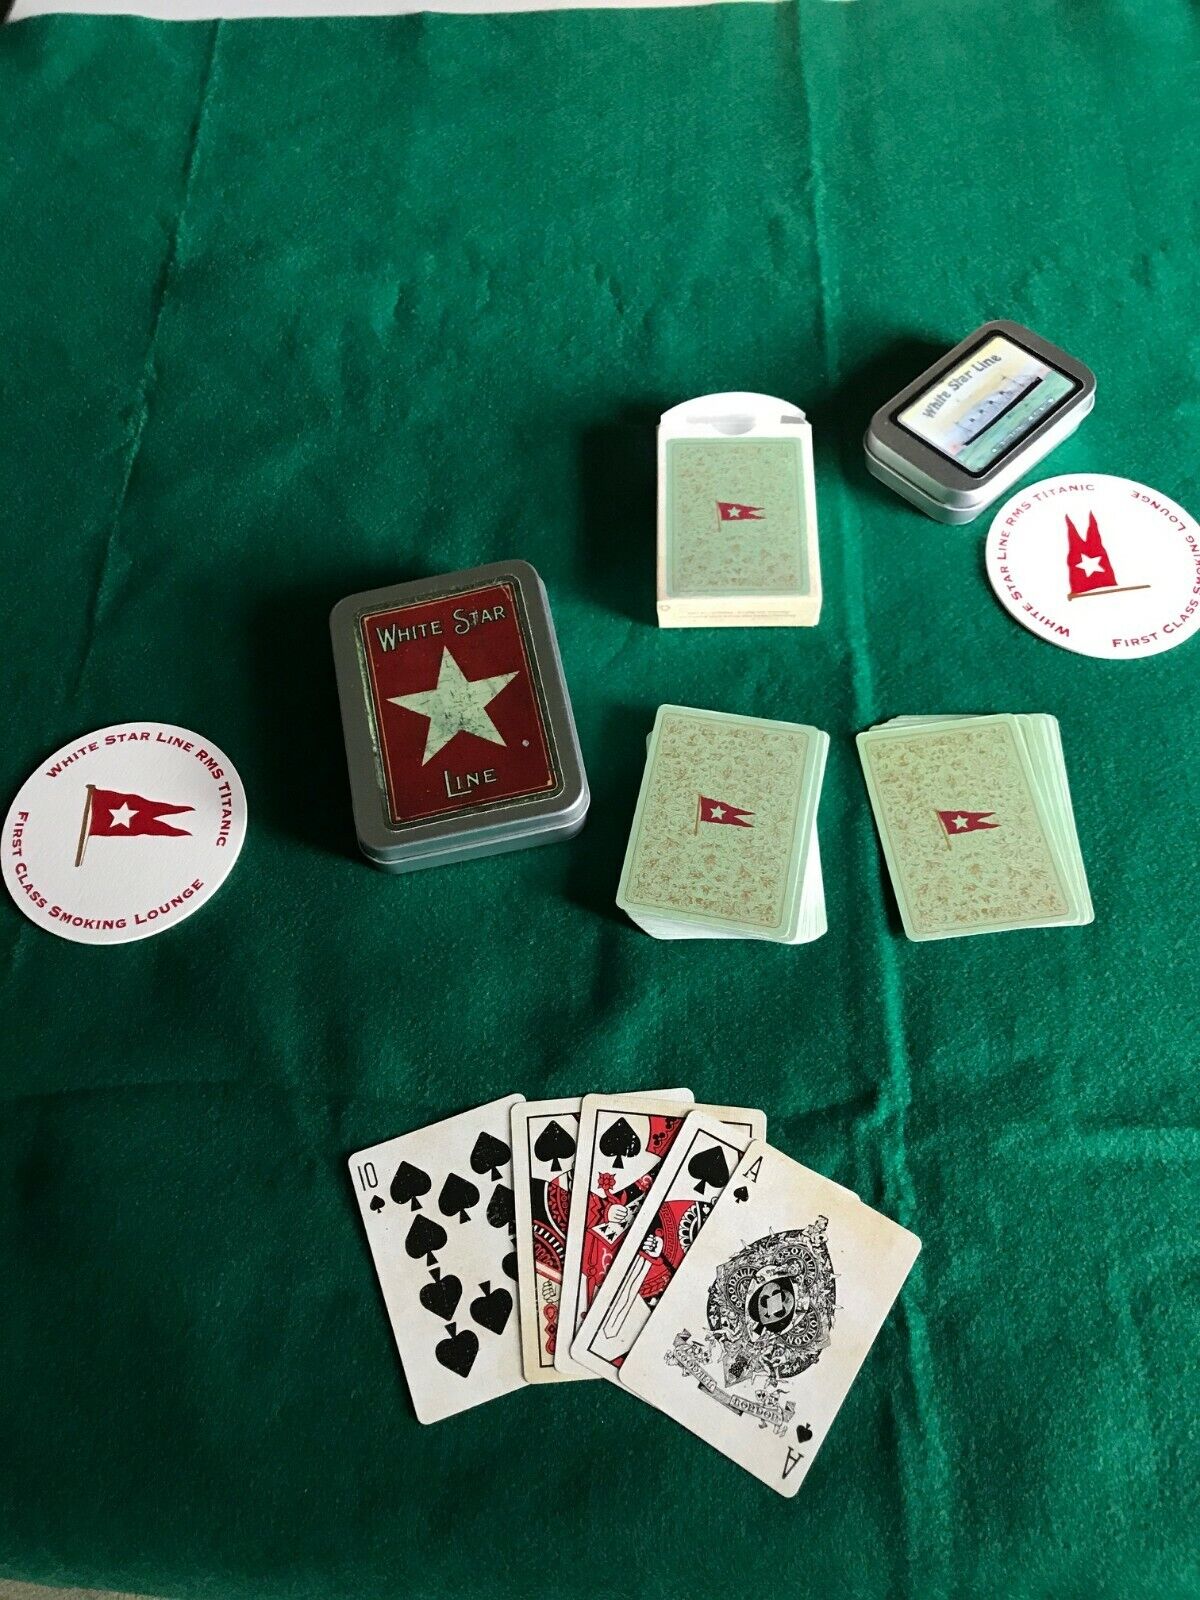 RMS Titanic Gamblers Collection--- You get everything 1912 replicas